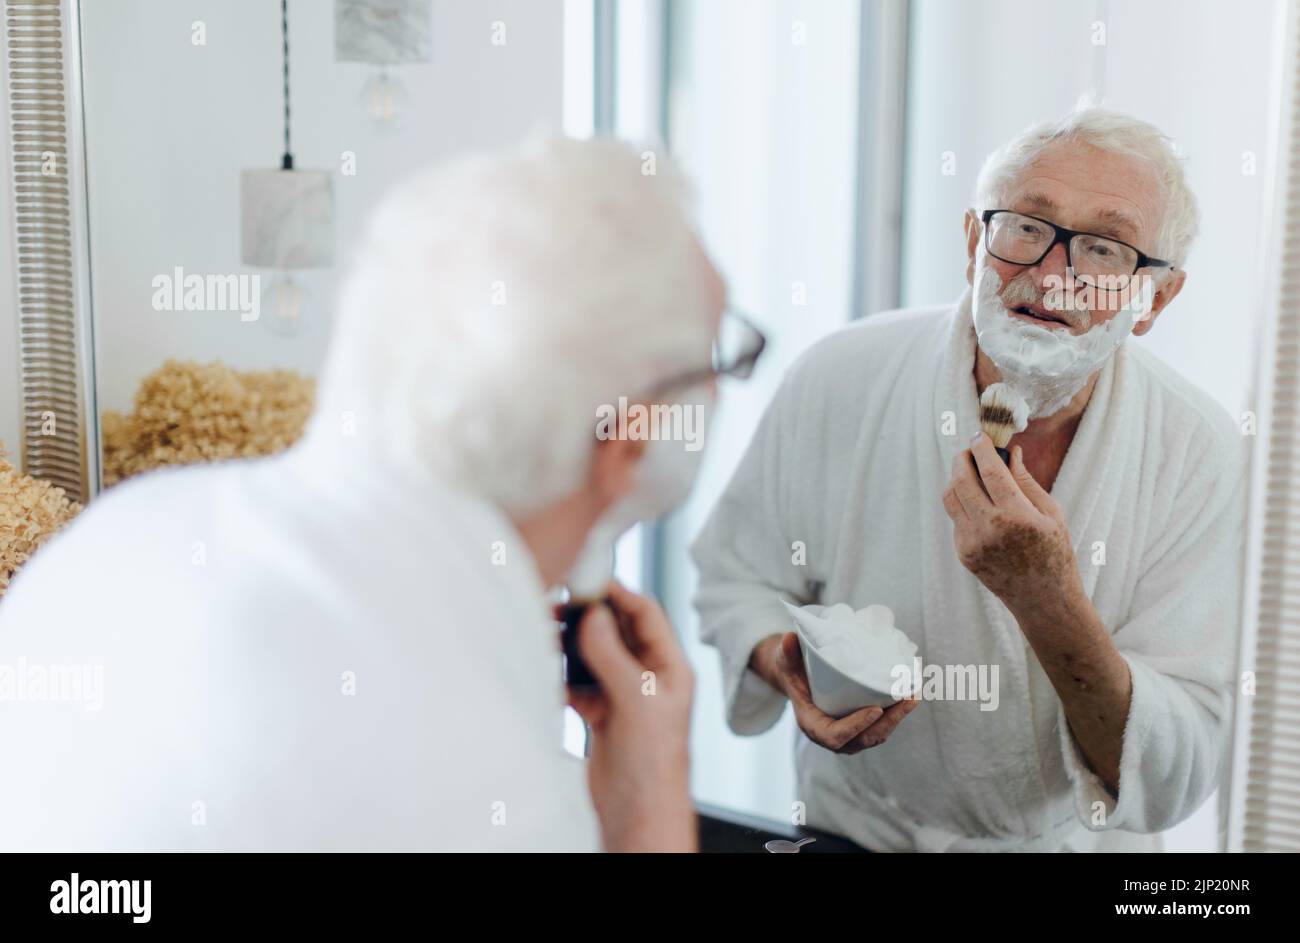 Senior man shaving his beard in the bathroom, looking in the mirror. Morning routine concept. Stock Photo